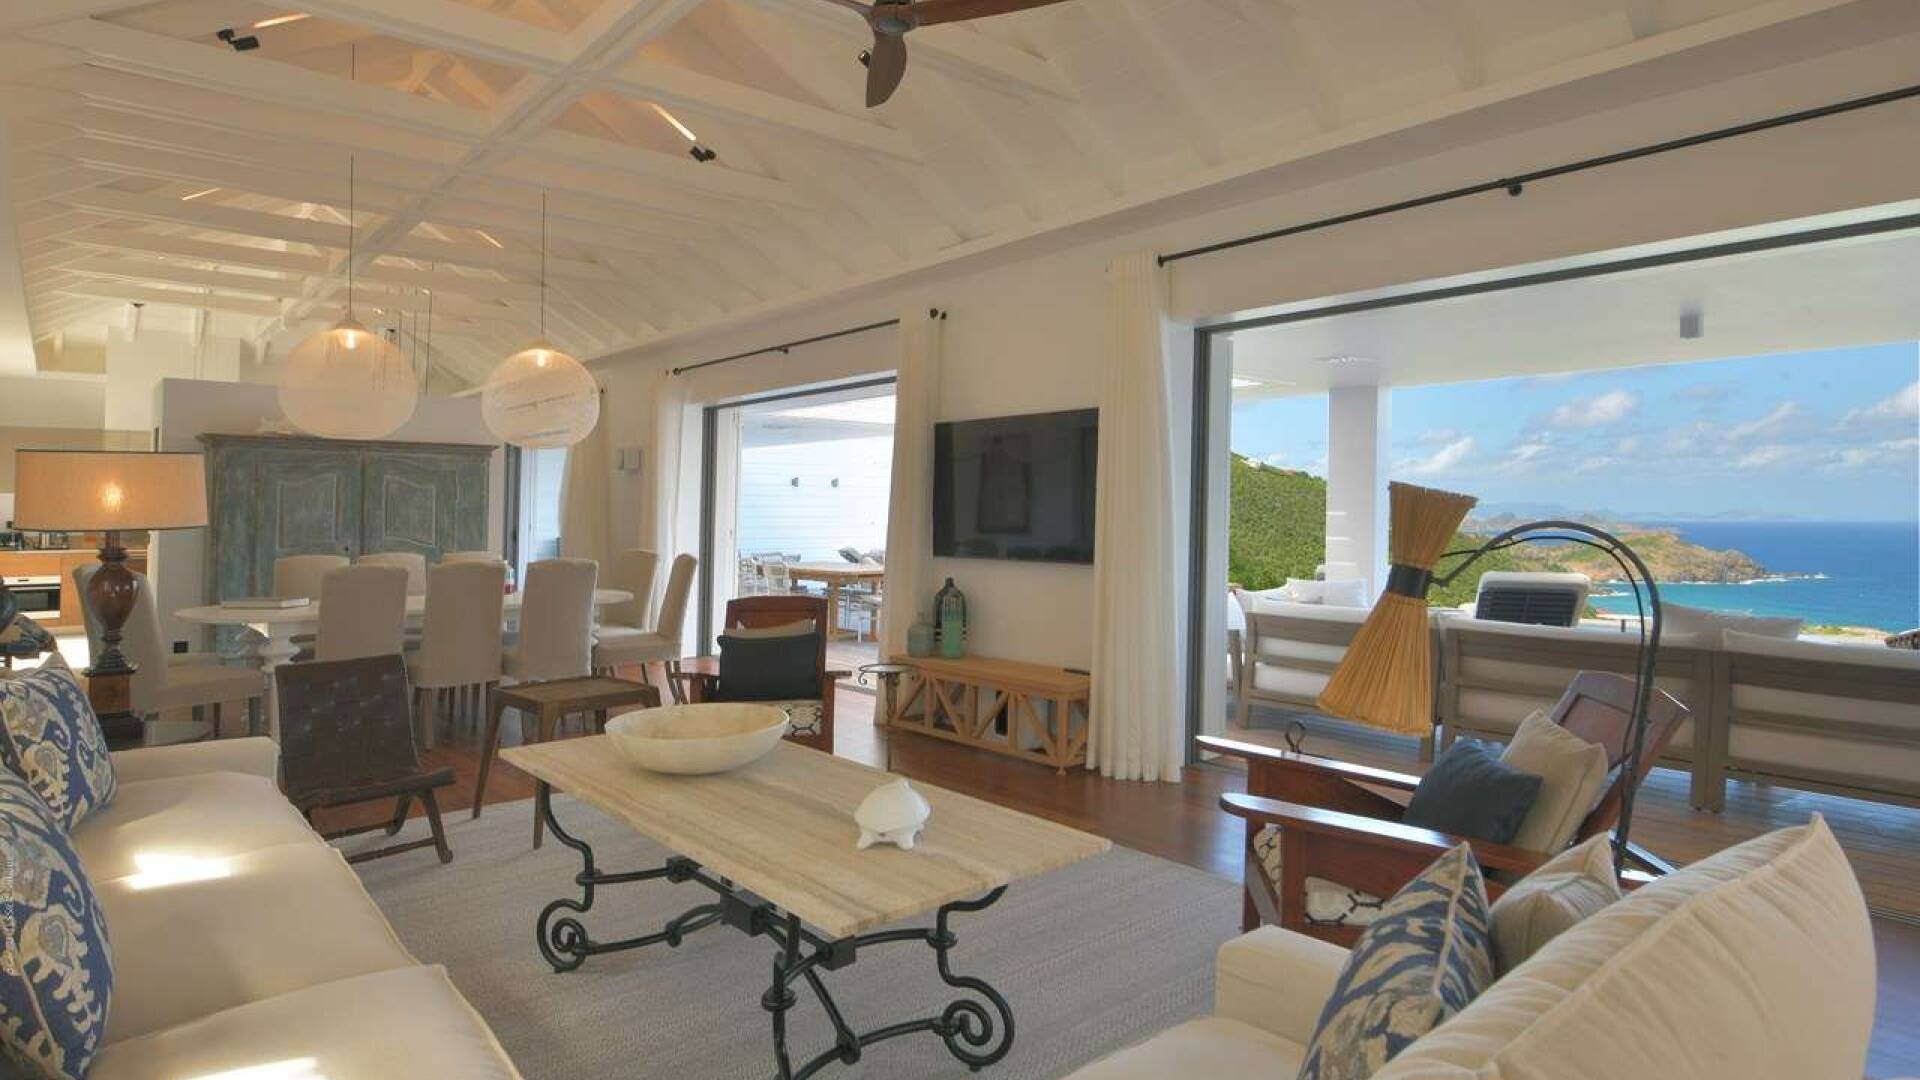 Living Room at WV RMN, Flamands, St. Barthelemy